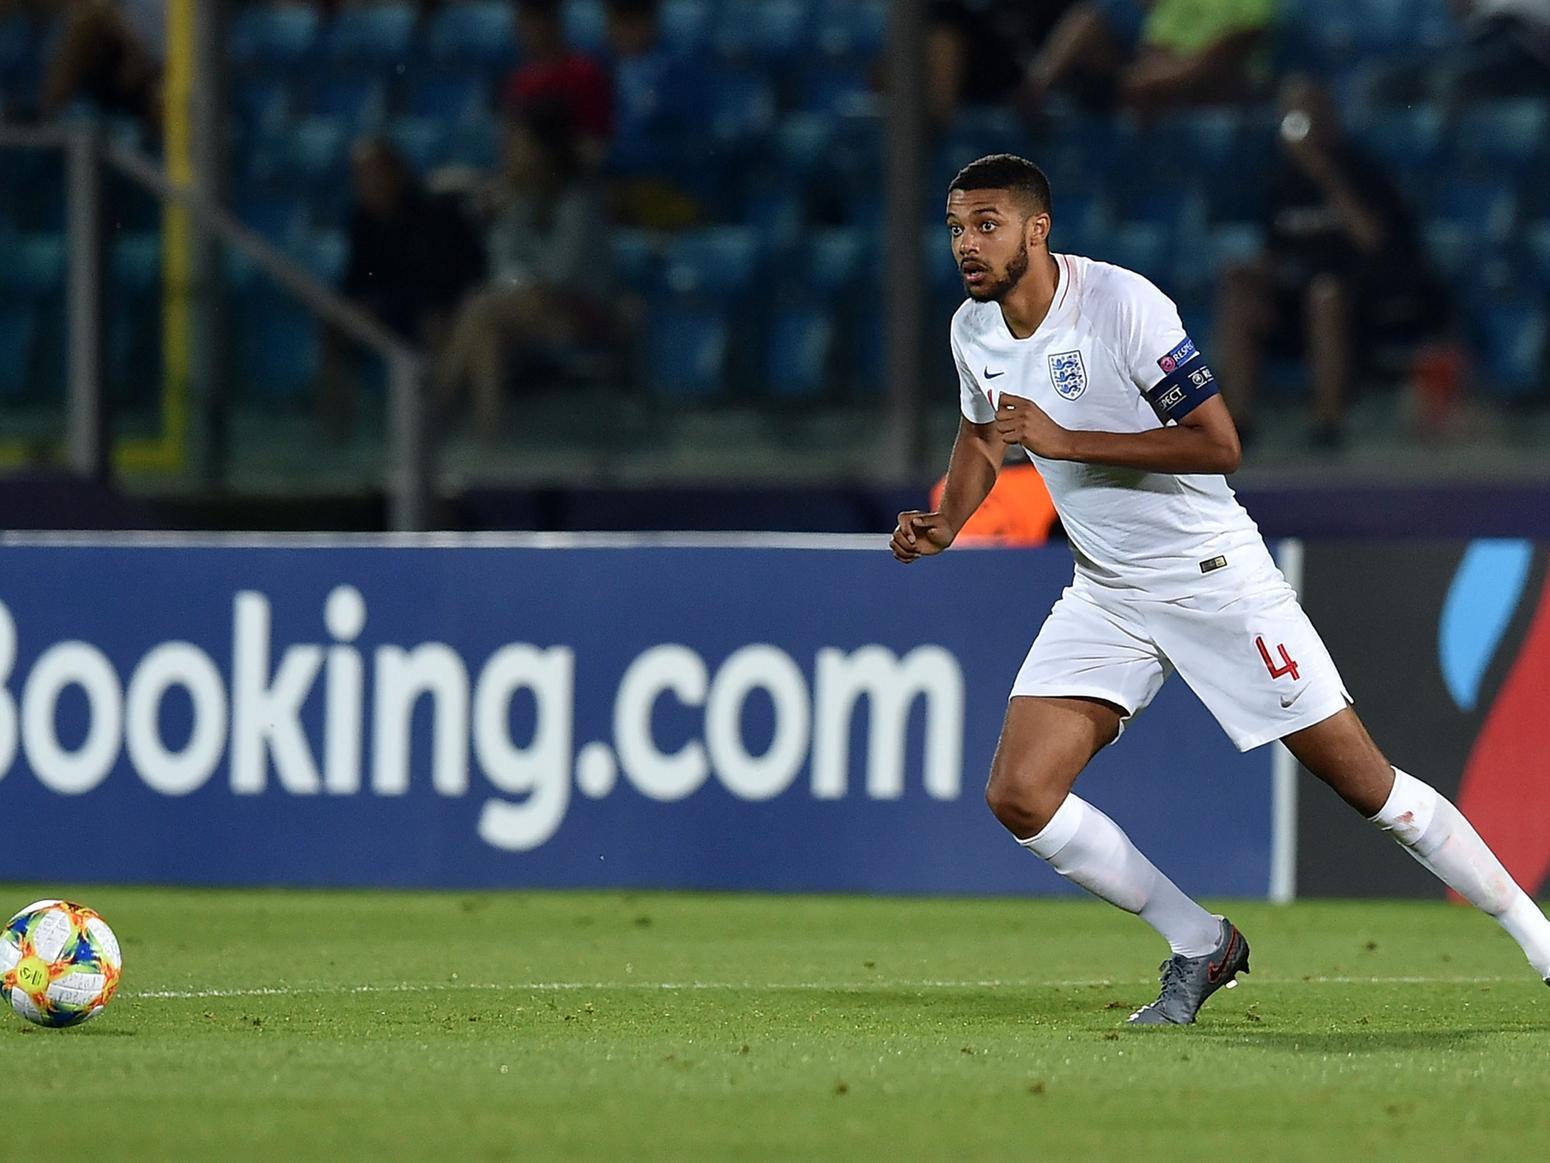 Birmingham City look likely to lose loanee defender Jake Clarke-Salter in the Januarytransfer window, with his parent club Chelsea ready to recall him due to a lack of first team football at St. Andrews. (Telegraph)